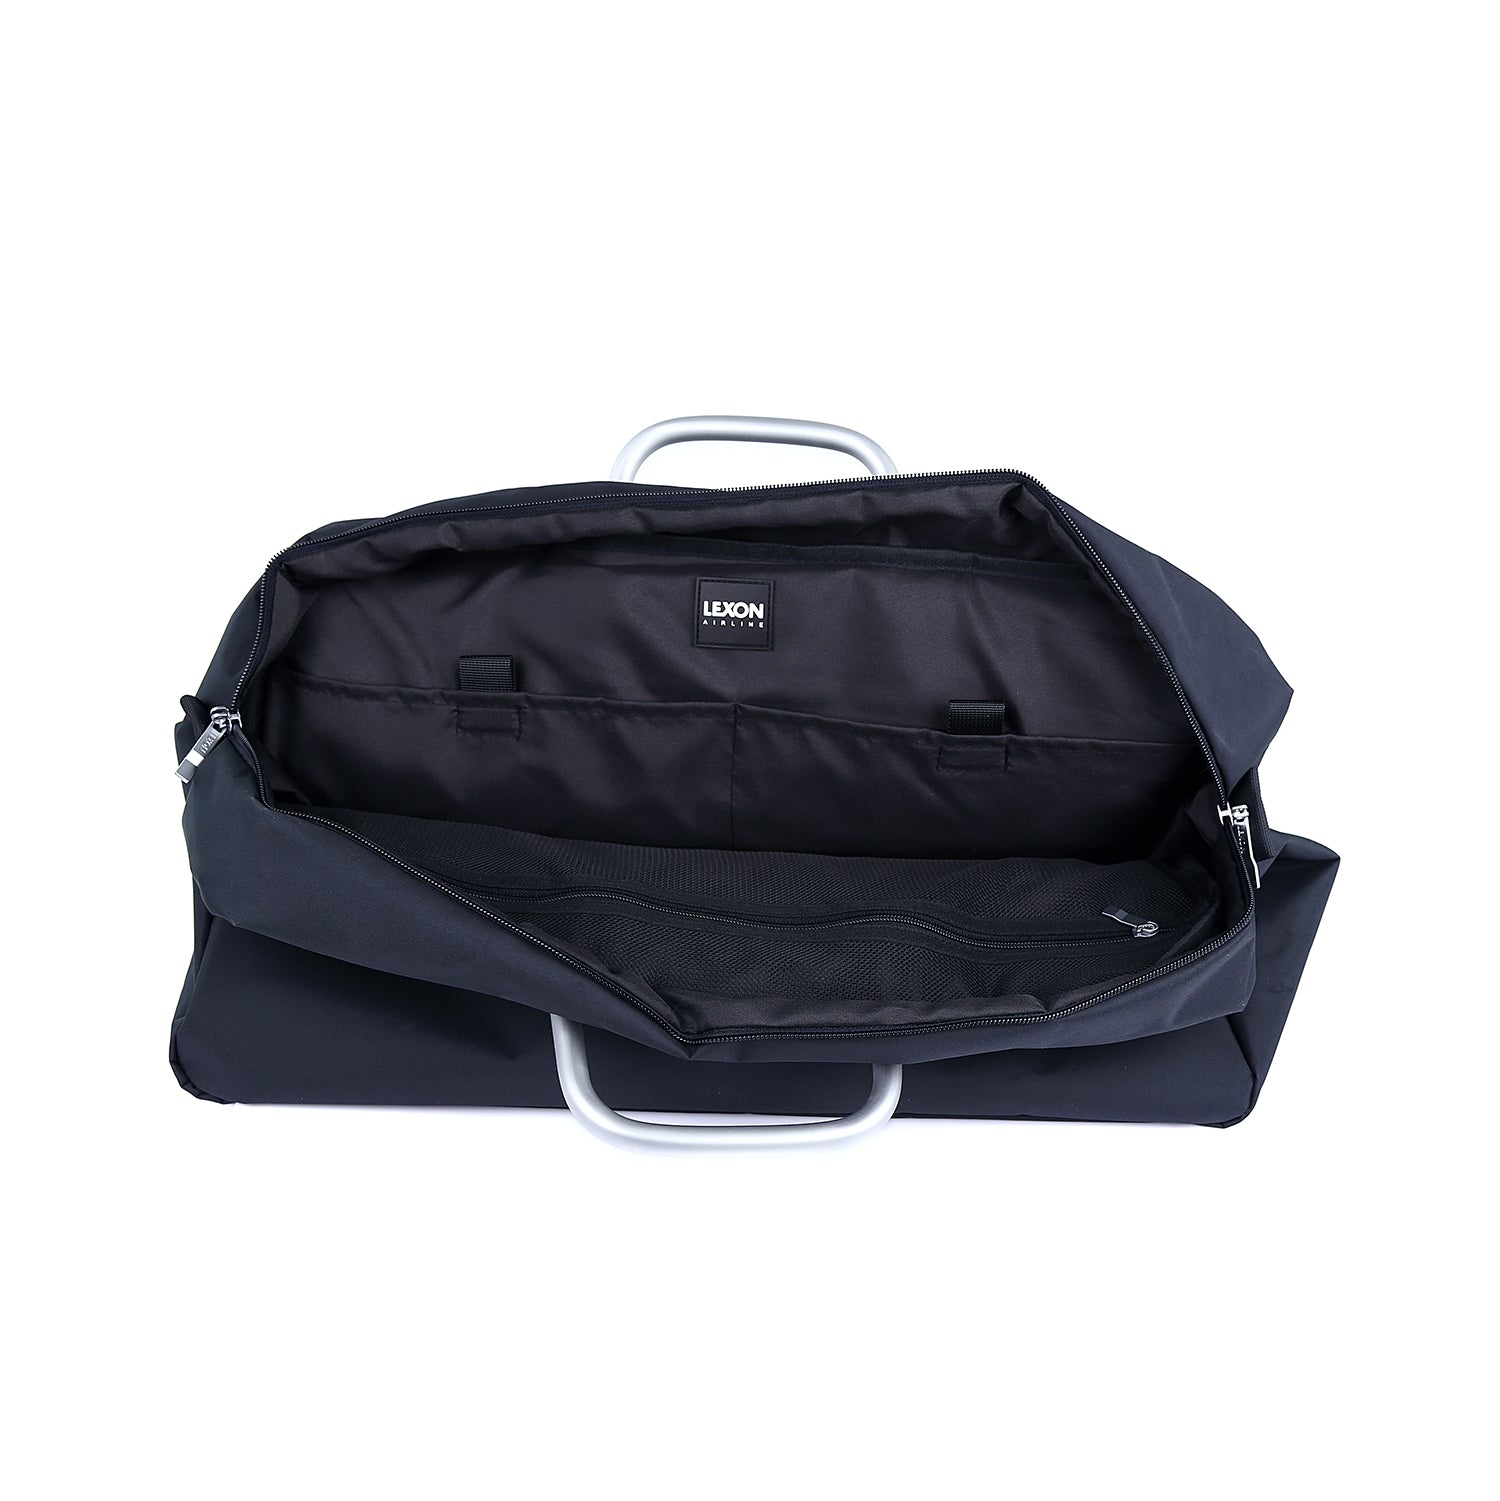 Lexon Small Flat : Amazon.in: Bags, Wallets and Luggage